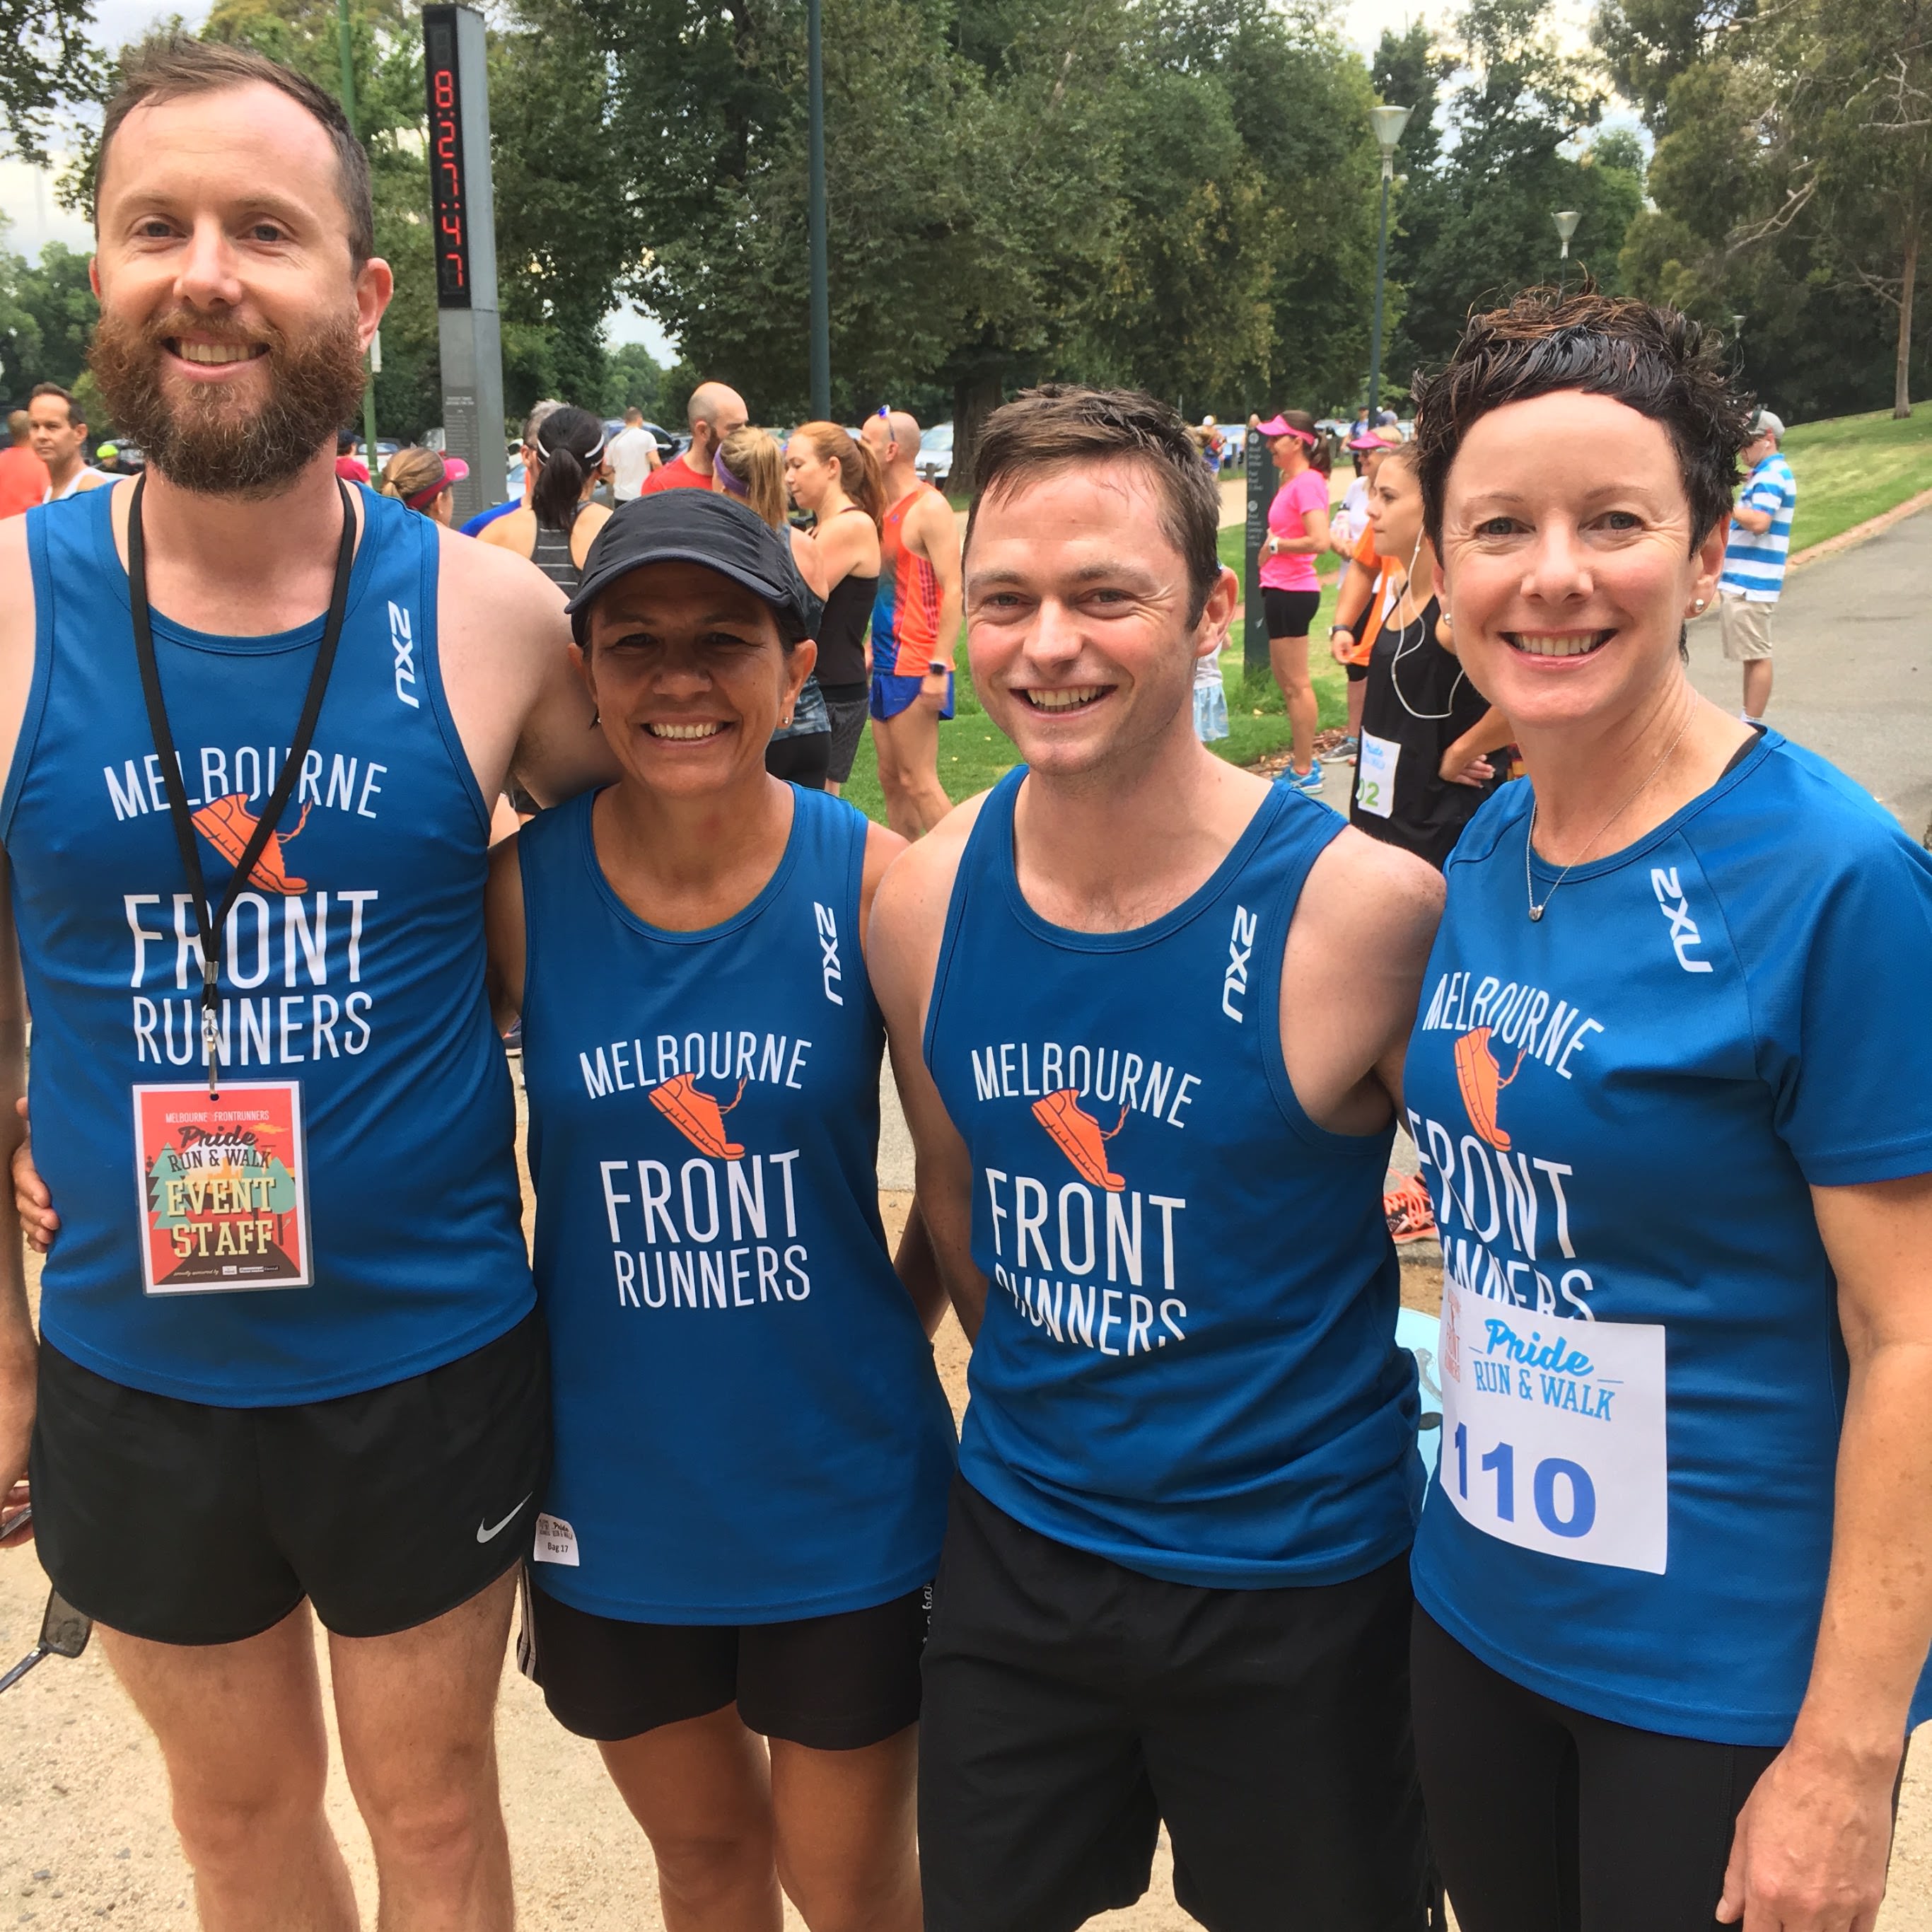 Melbourne Frontrunners Pride Run, groups of runners in their running gear smiling